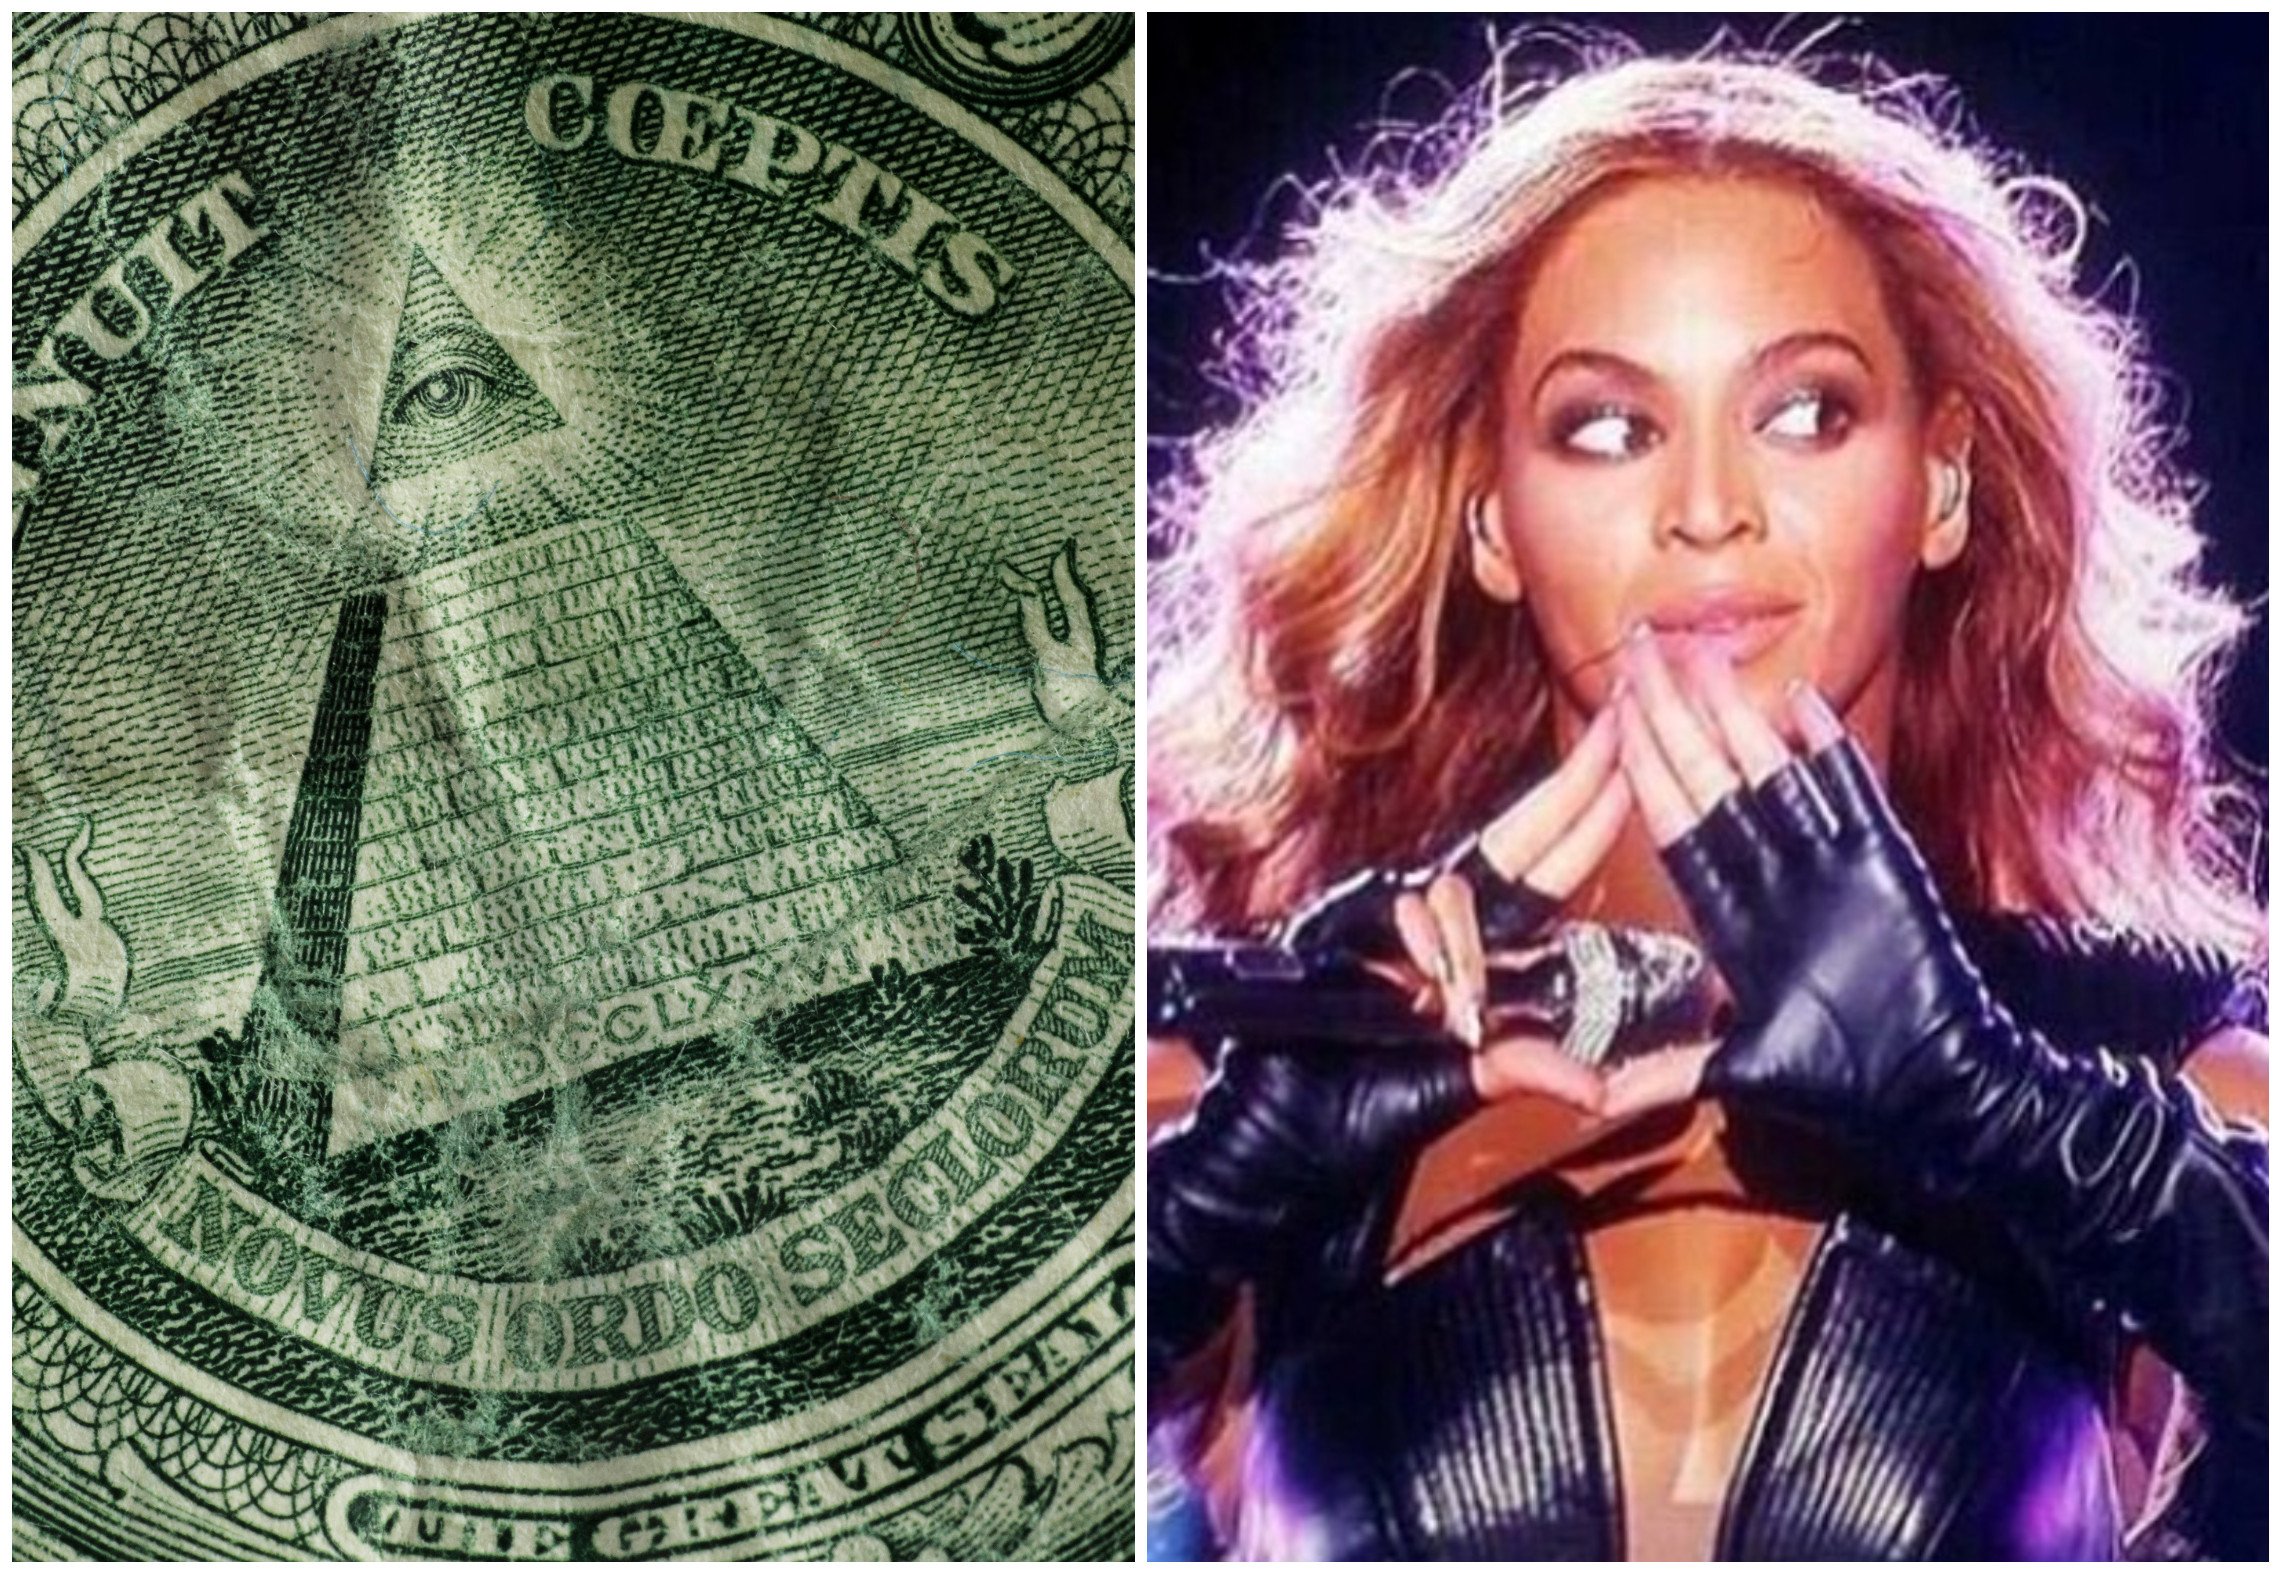 Beyoncé has been accused by conspiracy theorists of being in the Illuminati. Photos: Unsplash; @illuminatiminds/Instagram